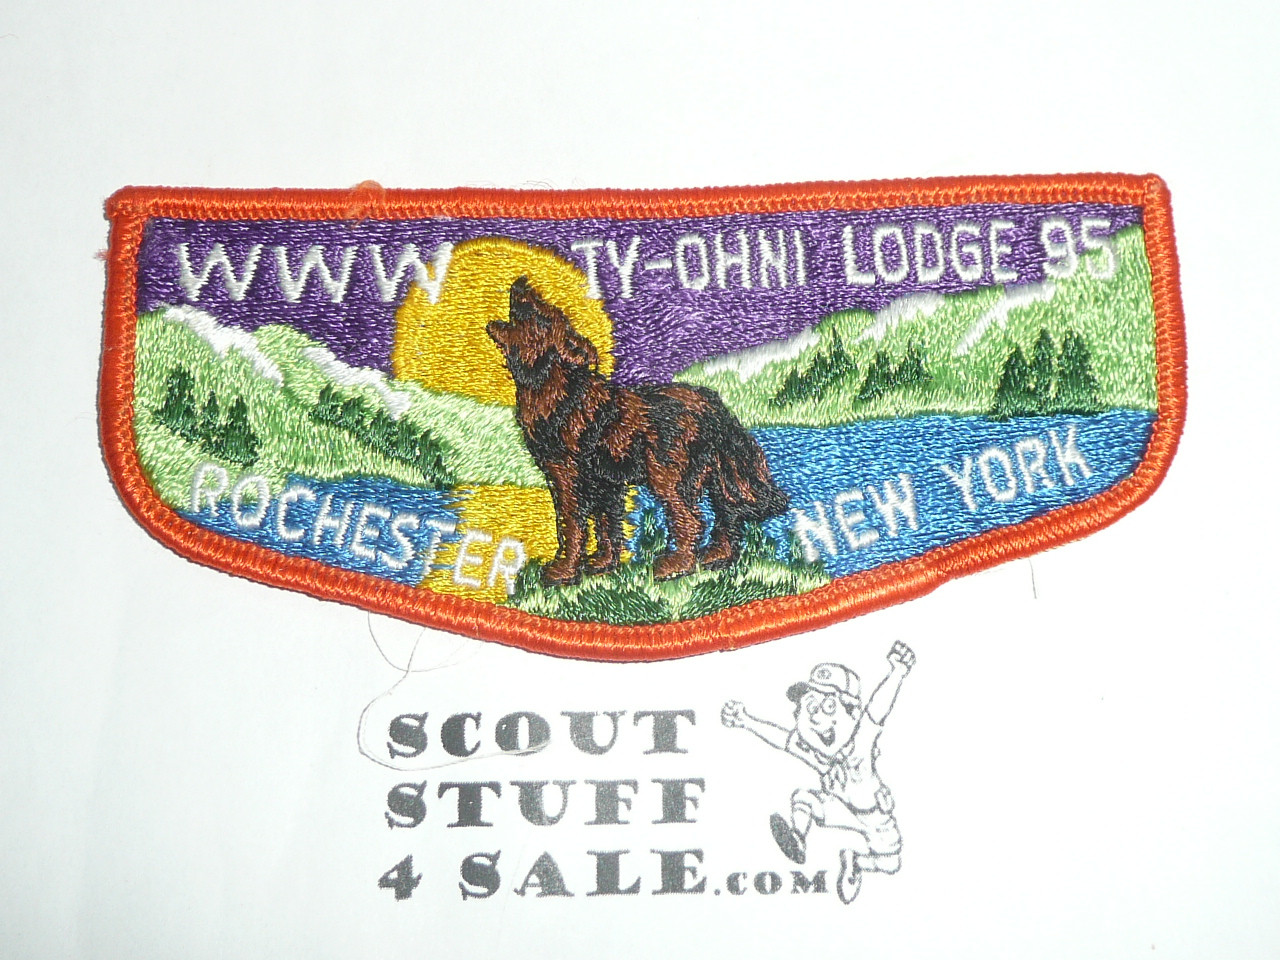 Order of the Arrow Lodge #95 Ty-Ohni s5 Flap Patch